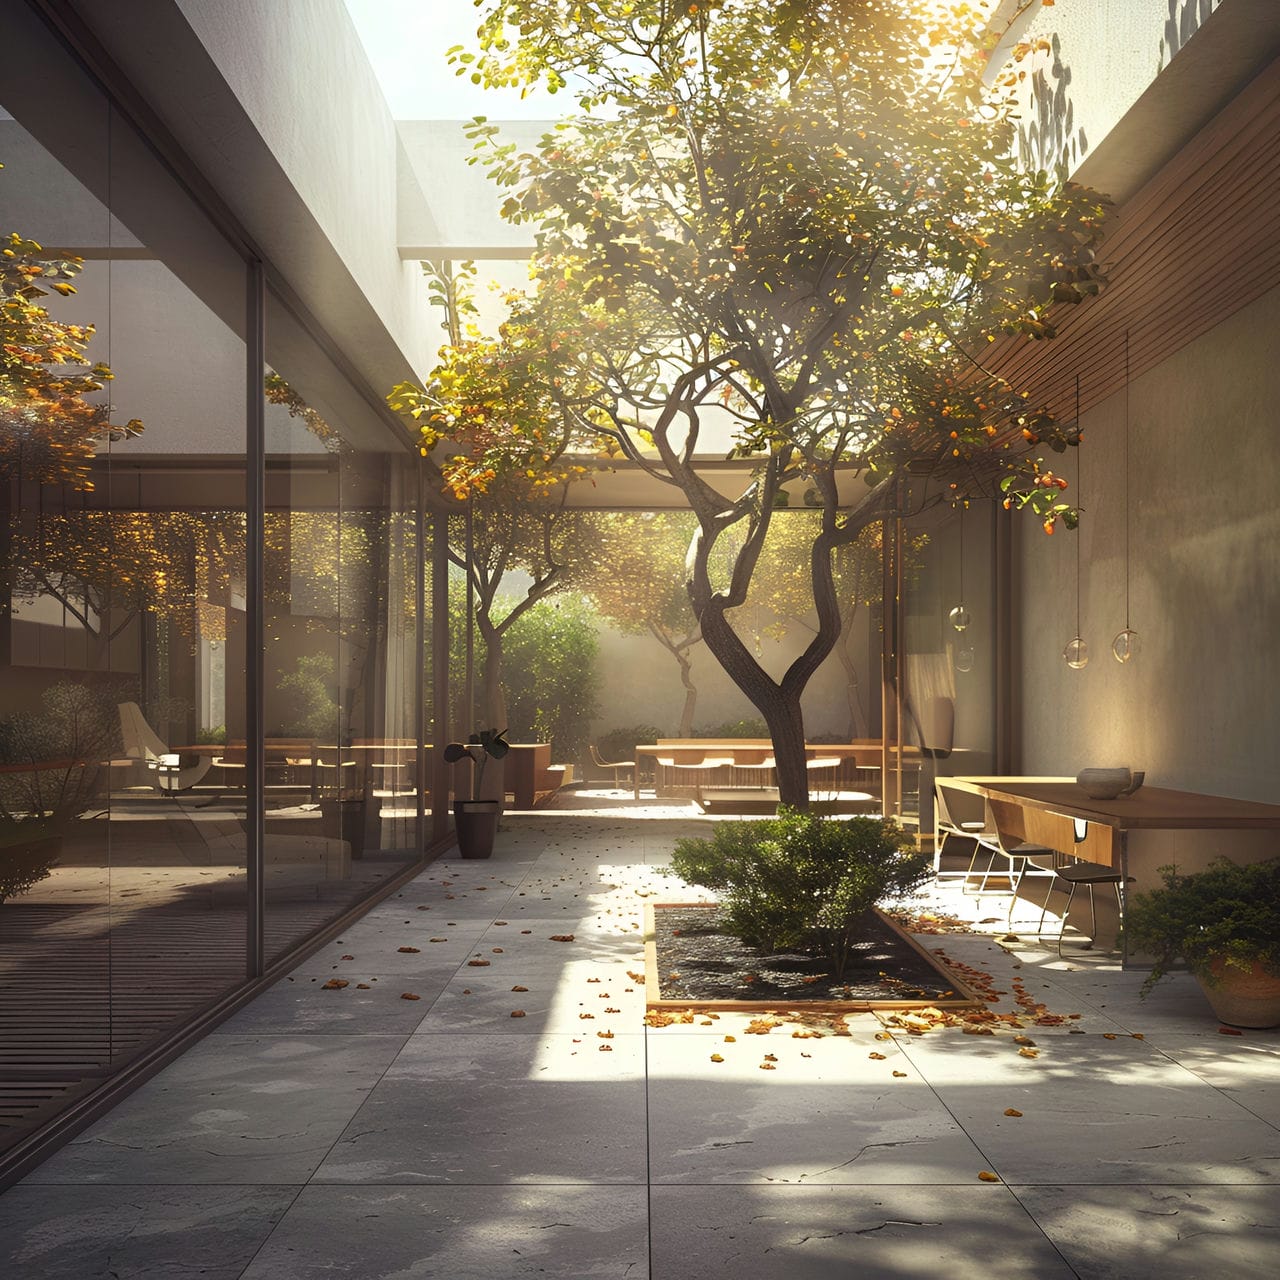 Courtyard: size, functionality, uses, furniture and renovation